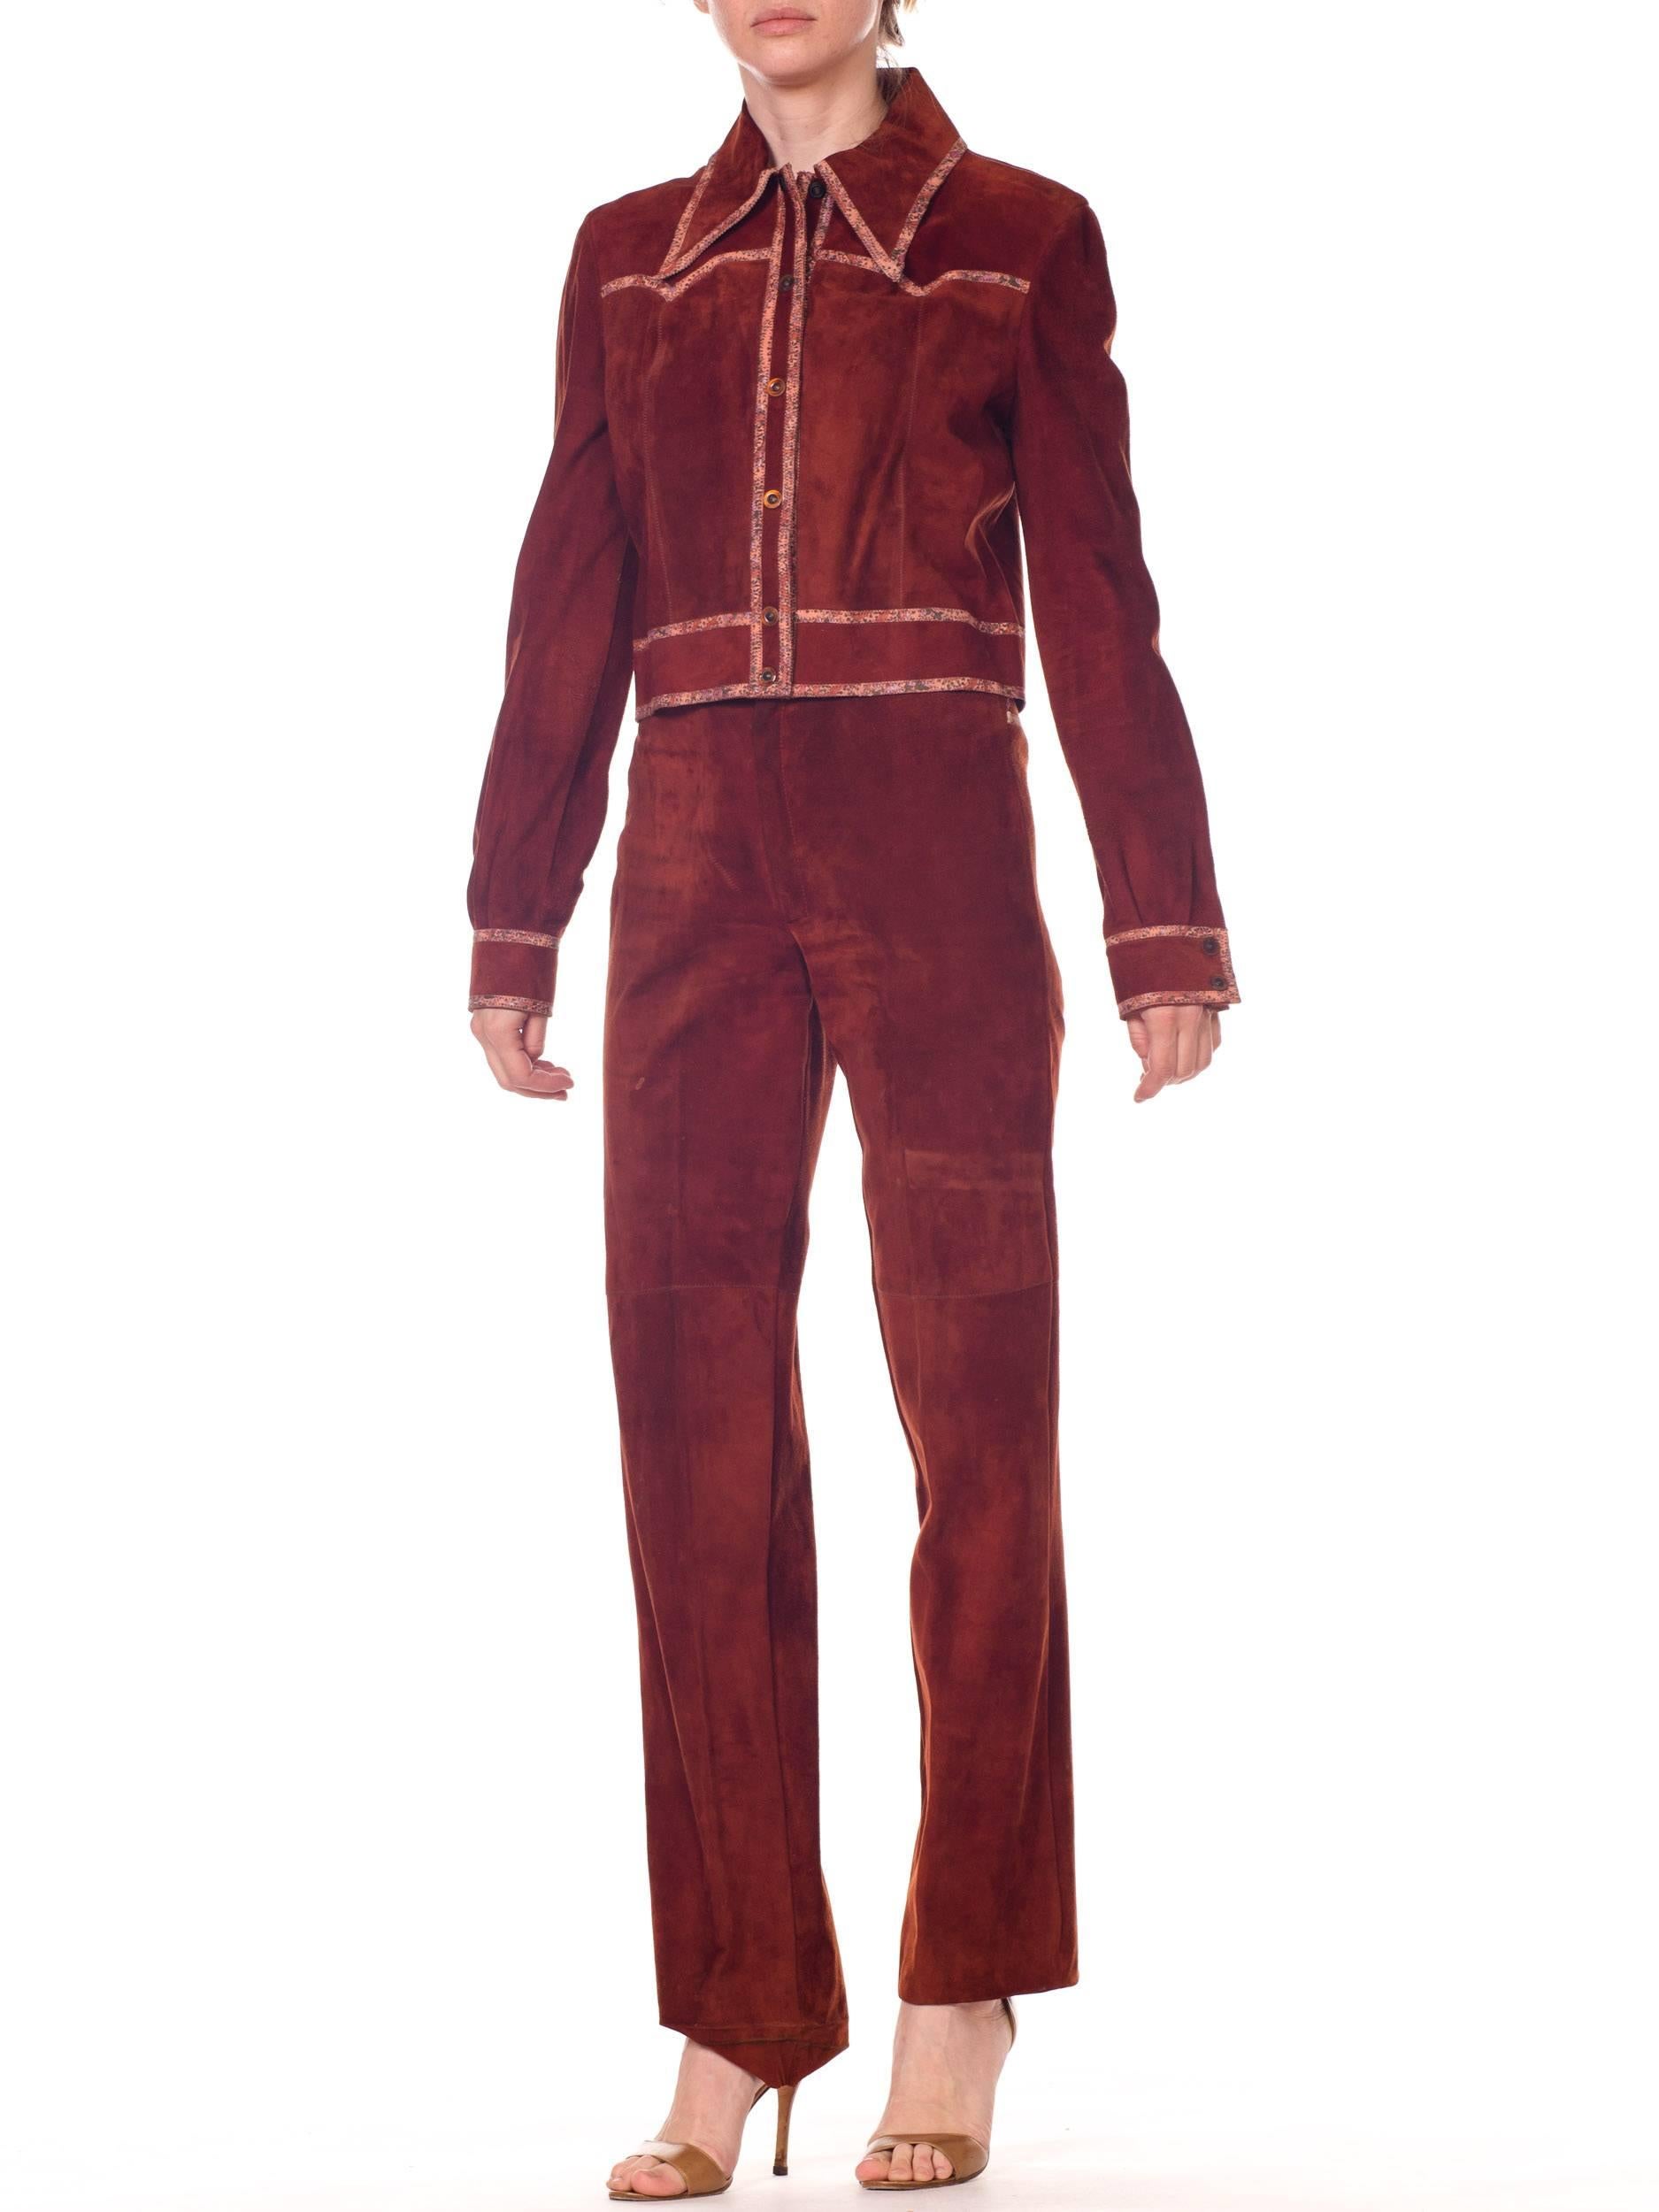 Roberto Cavalli Cognac Suede Pants and Jacket set with printed trims 1970